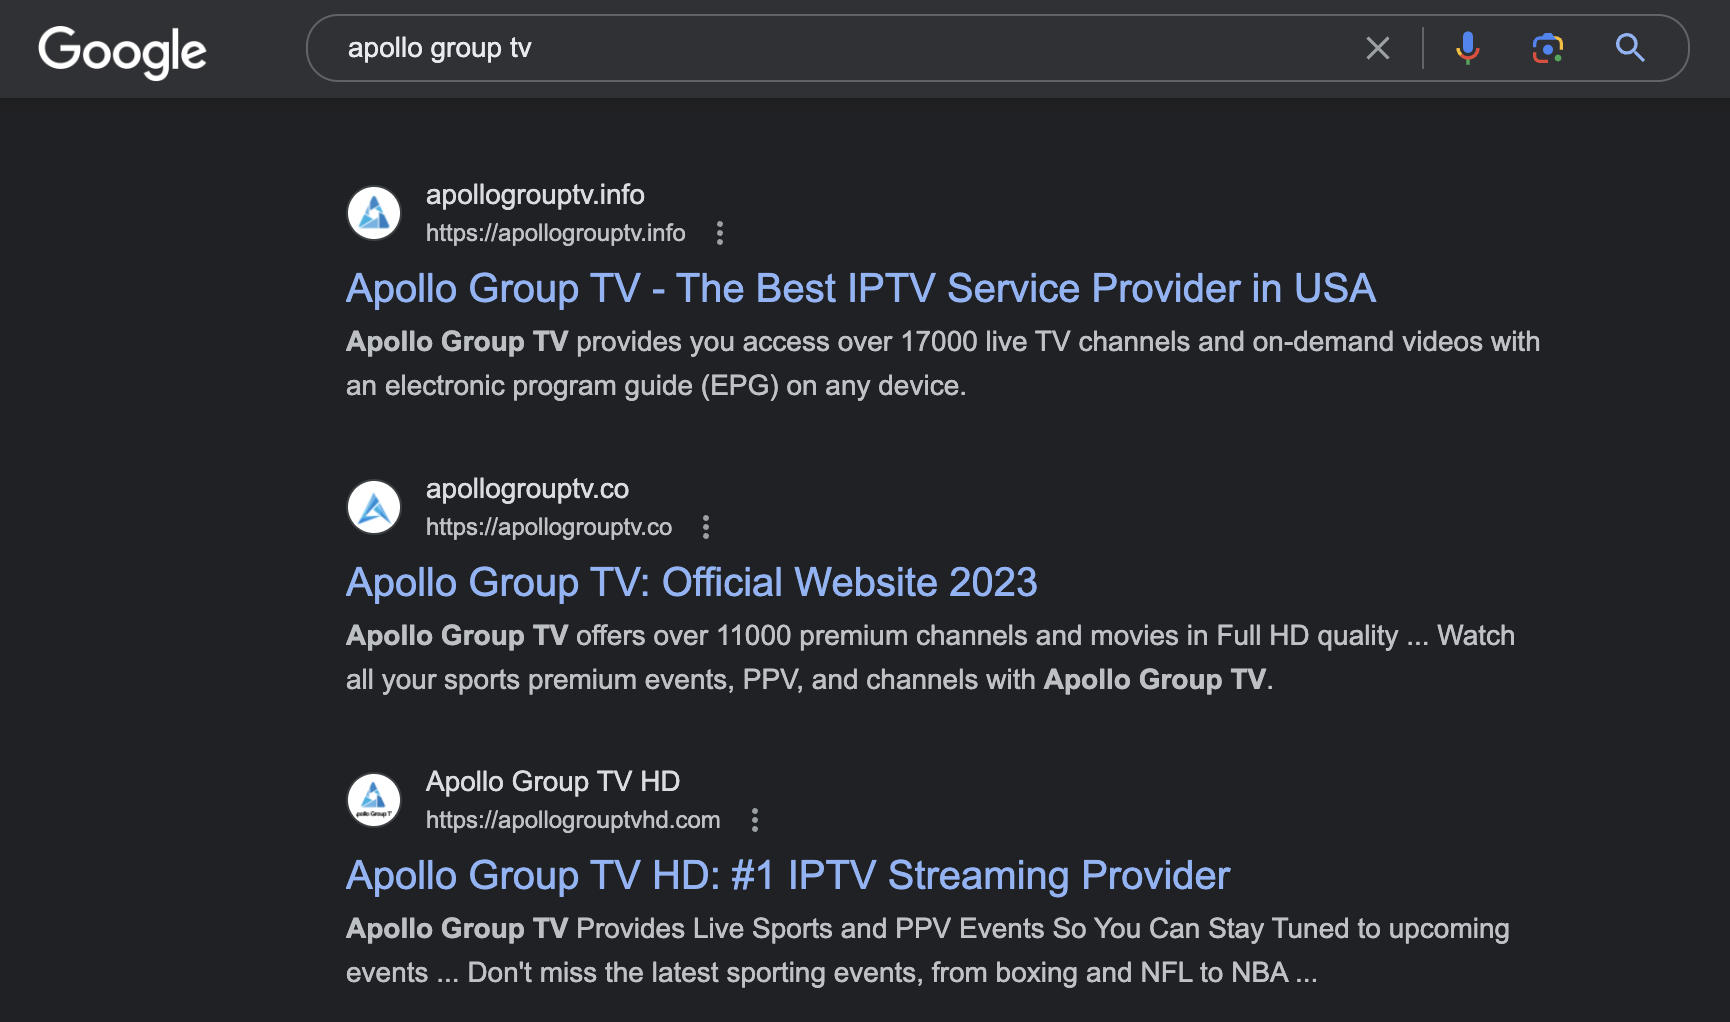 If you do a simple Google search for the term “Apollo Group TV," you will likely find the following results: